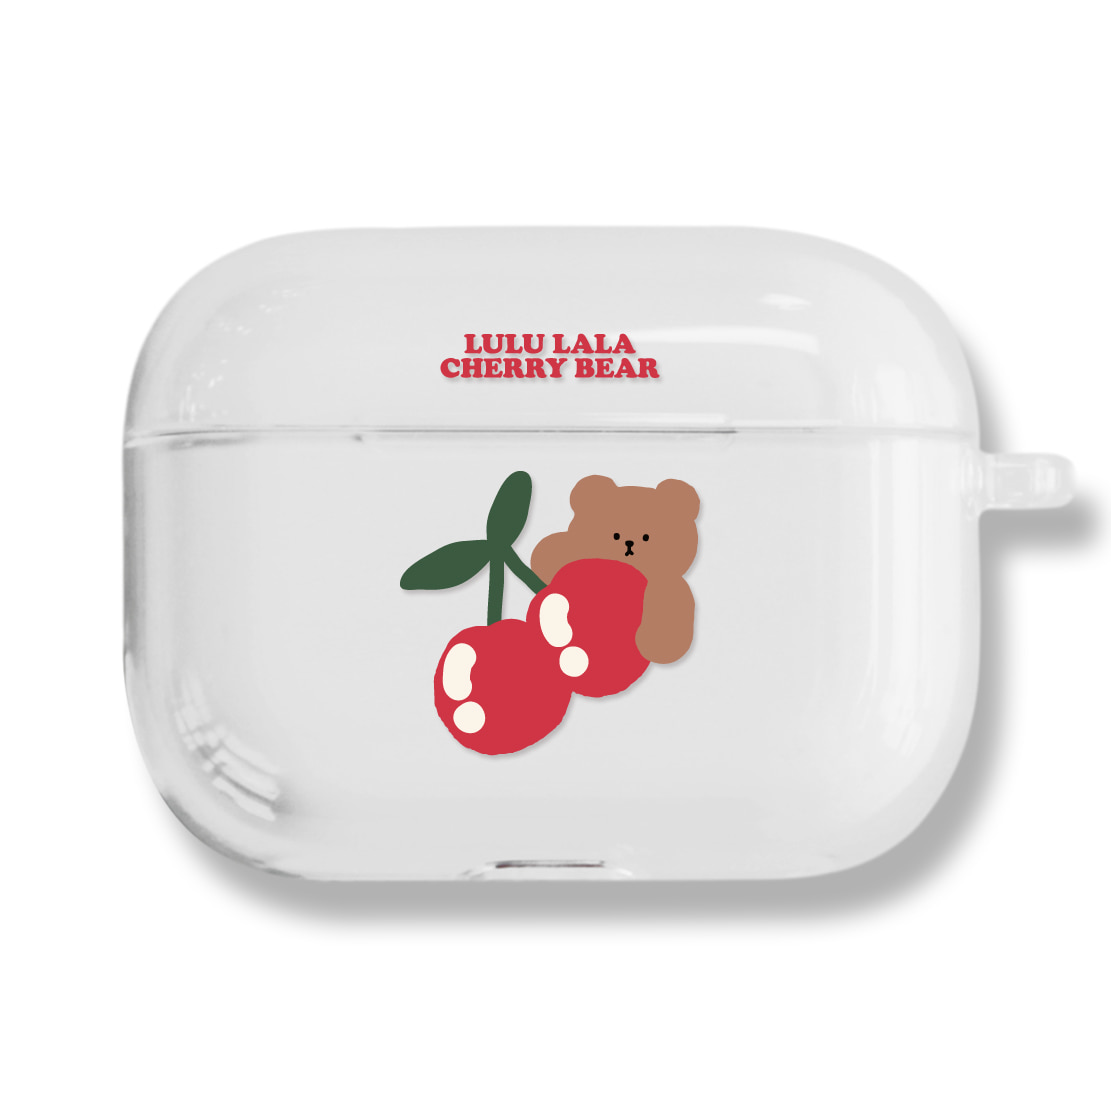 [CLEAR AIRPODS PRO] 663 체리BEAR